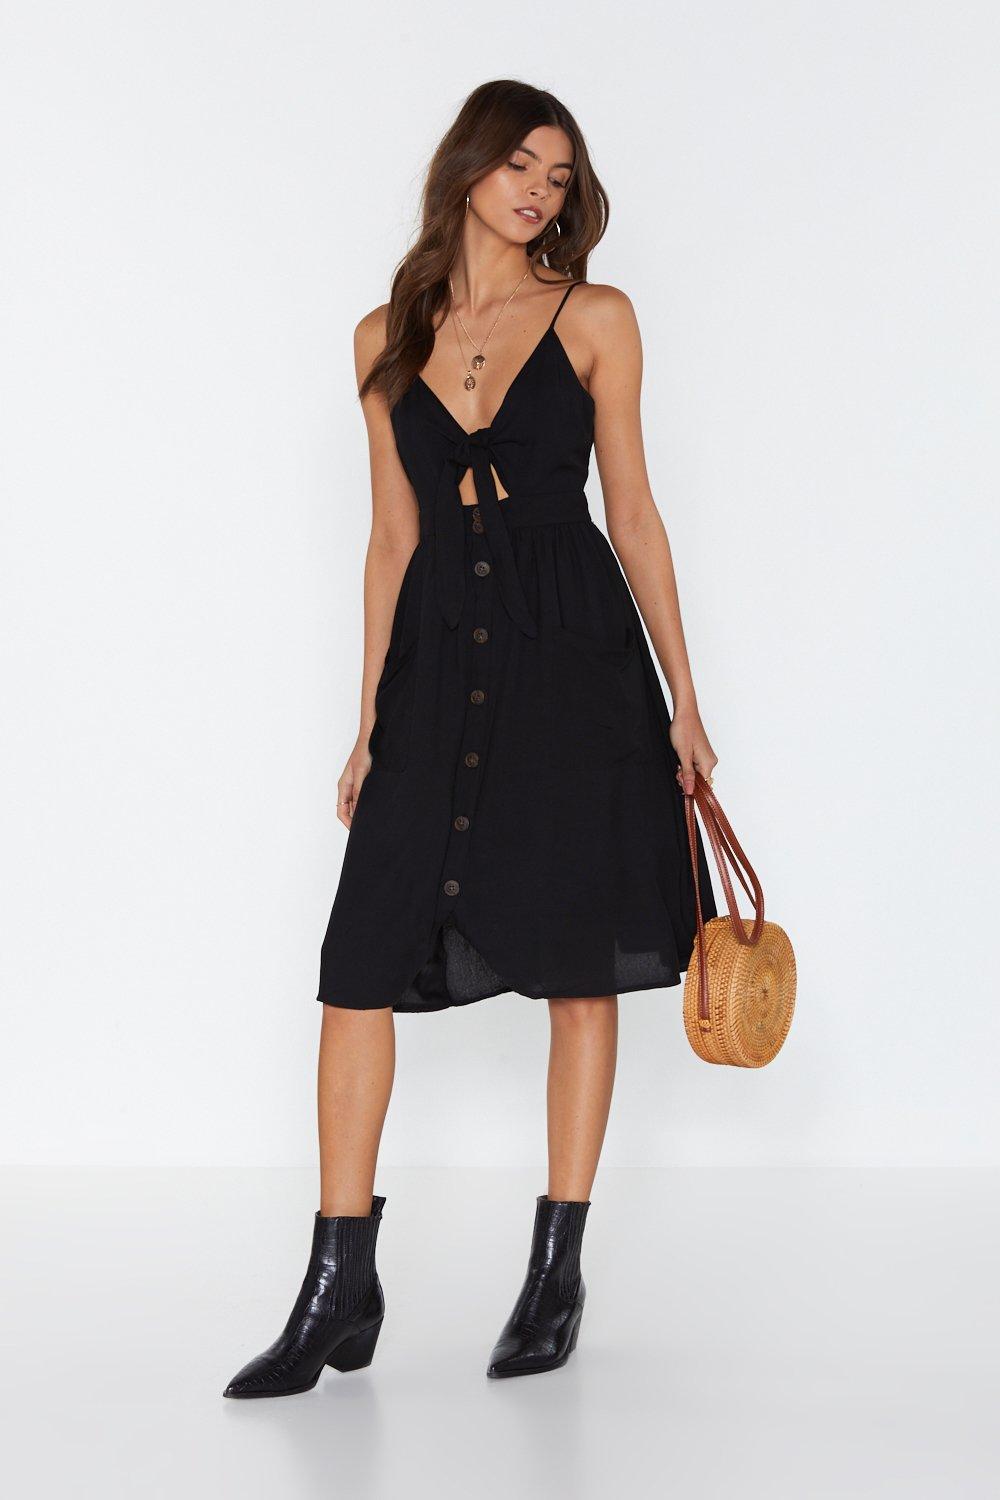 black dress with buttons down the front